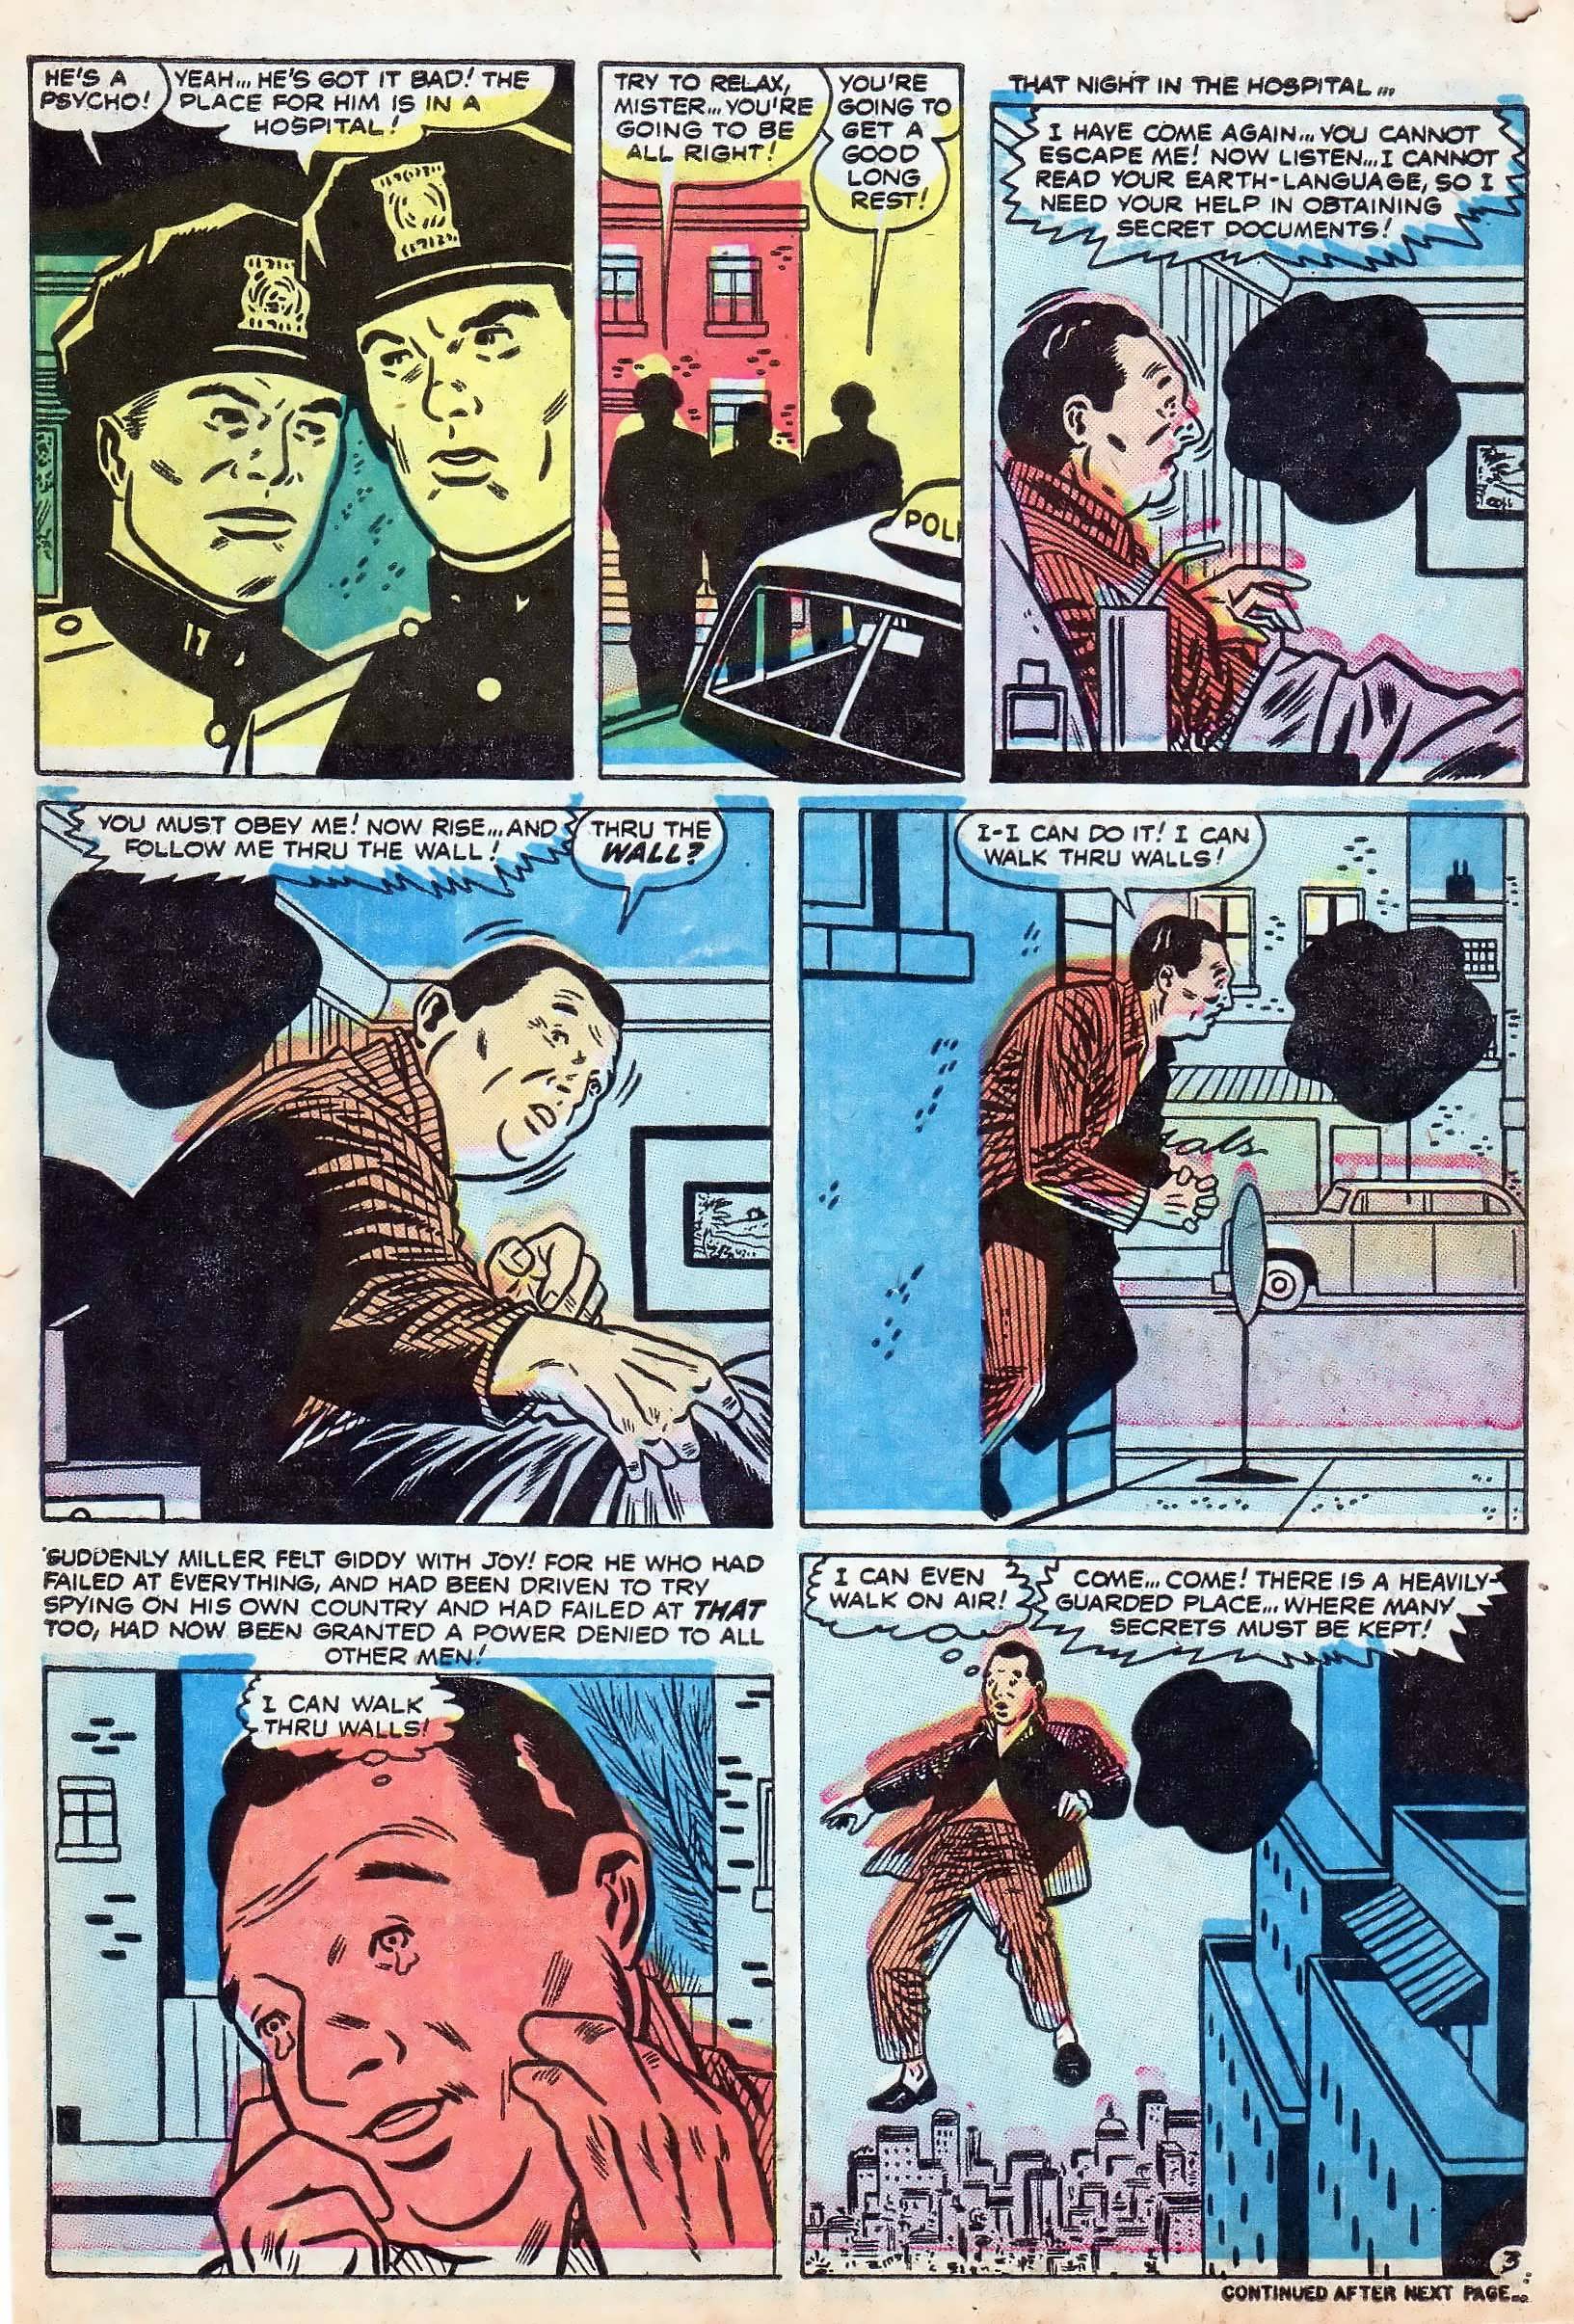 Marvel Tales (1949) 157 Page 9